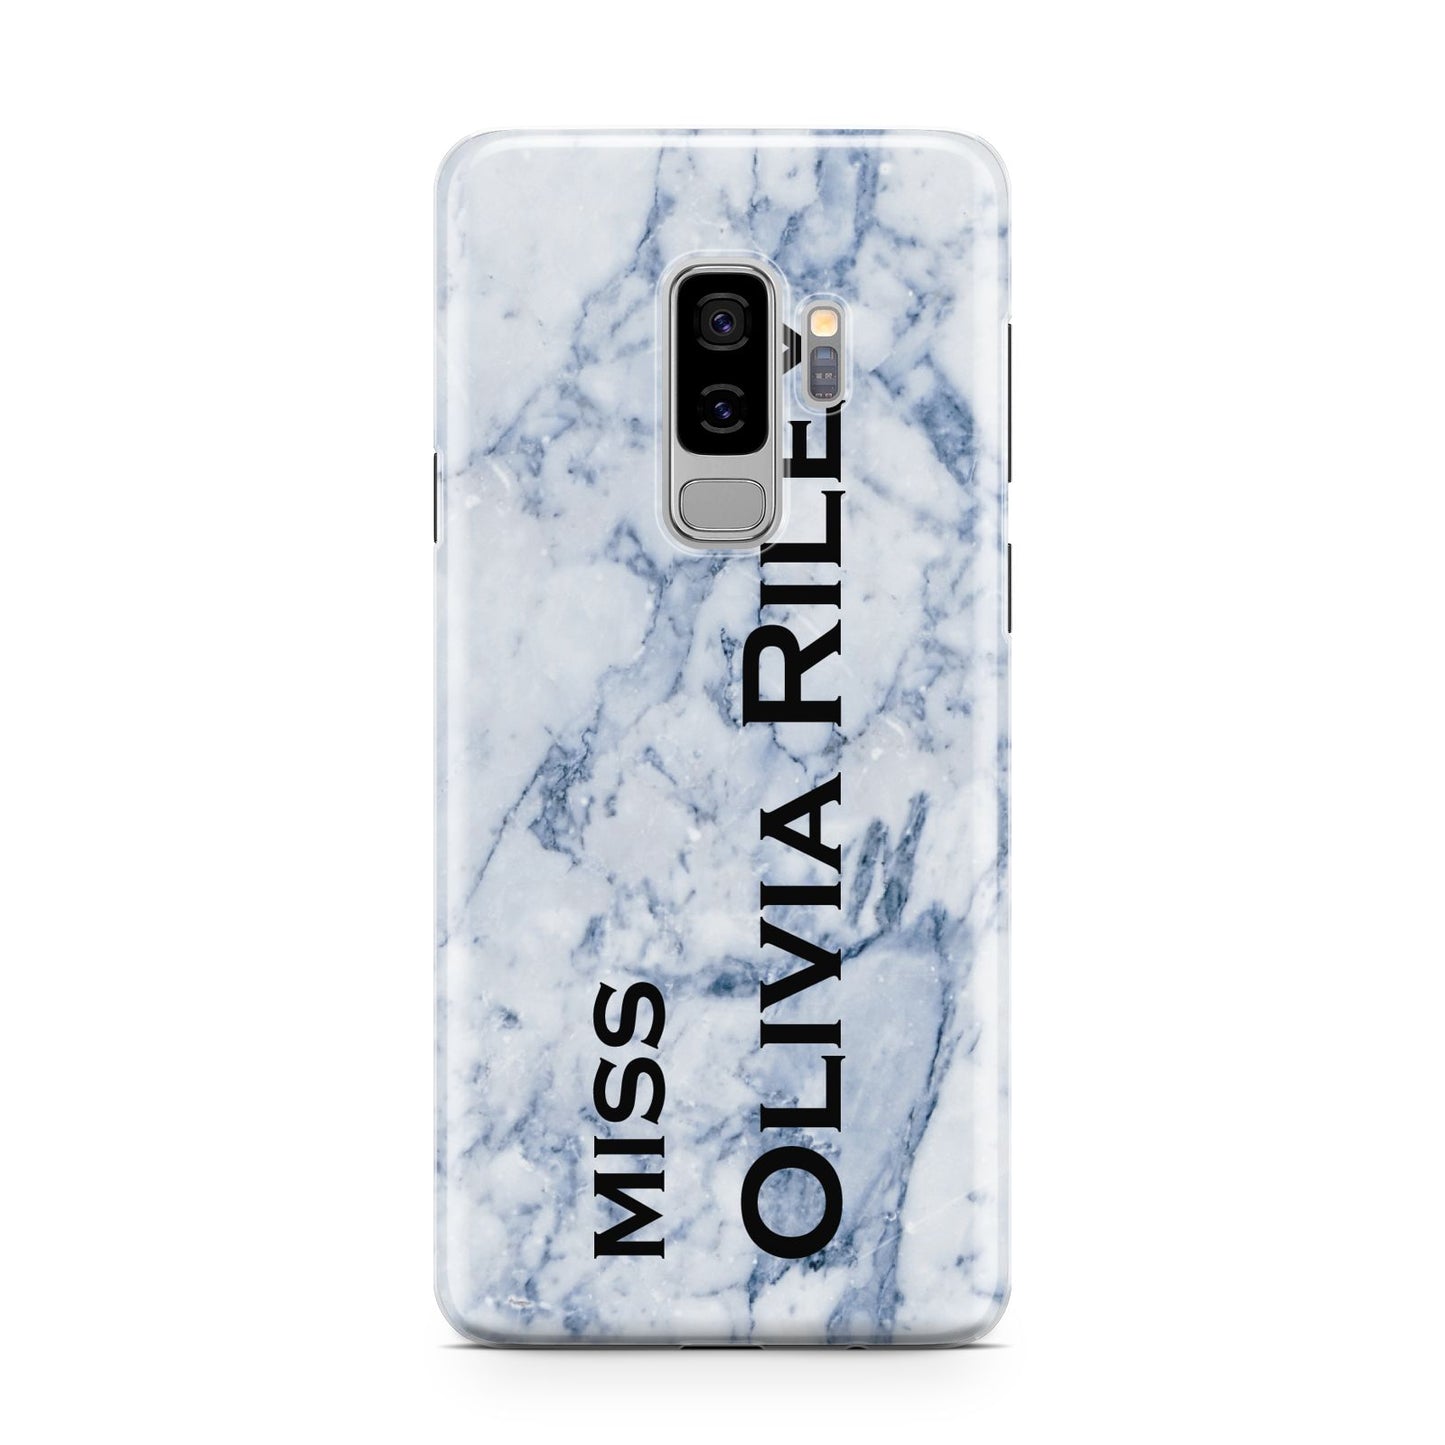 Full Name Grey Marble Samsung Galaxy S9 Plus Case on Silver phone